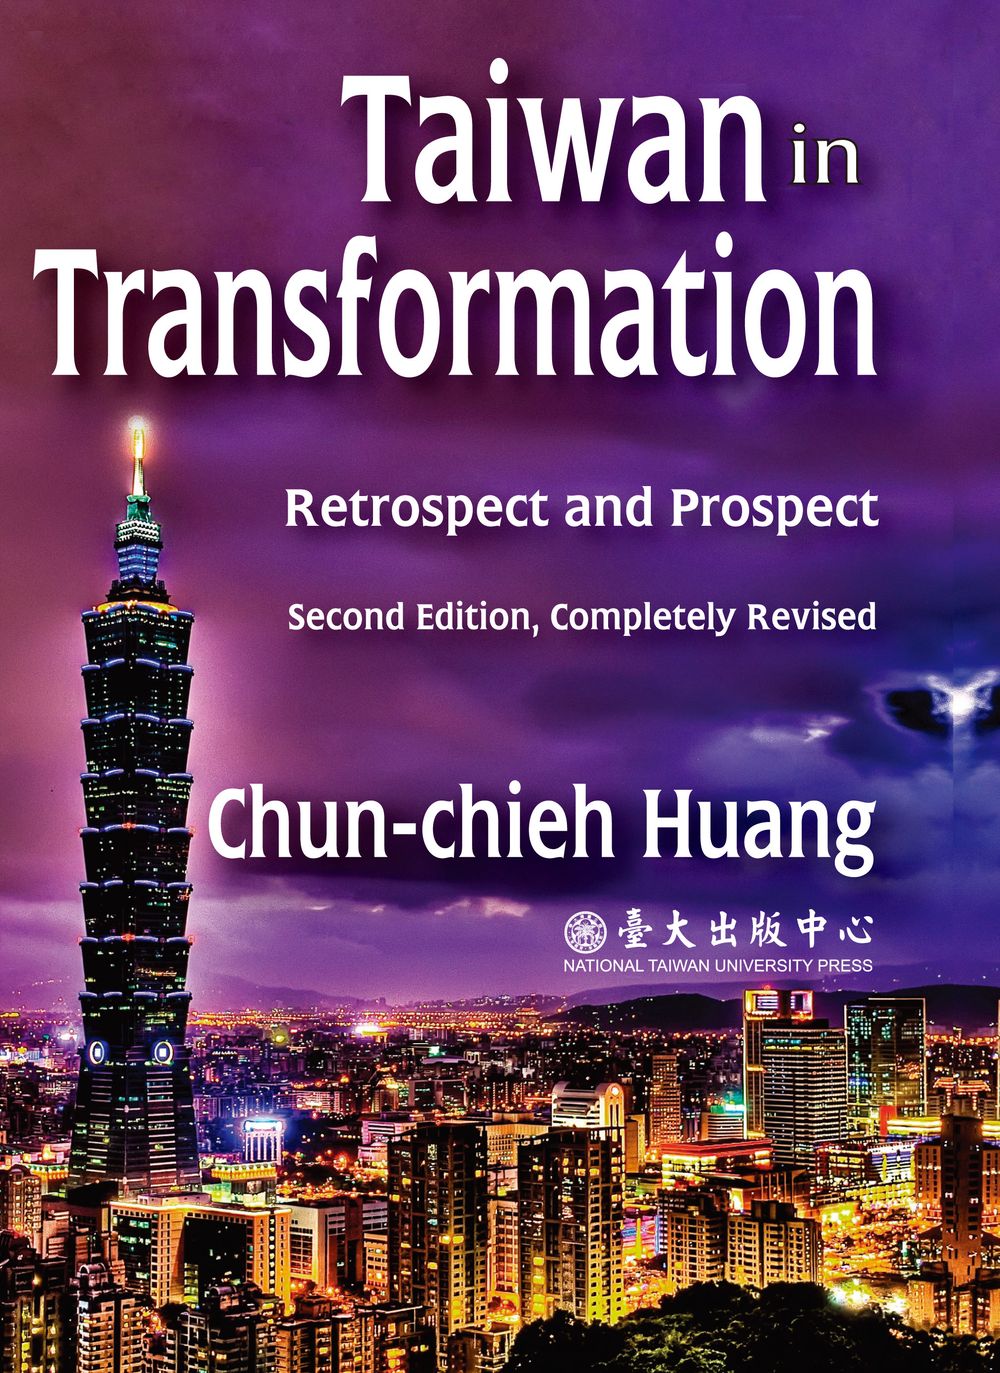 Taiwan in Transformation: Retrospect and Prosepct